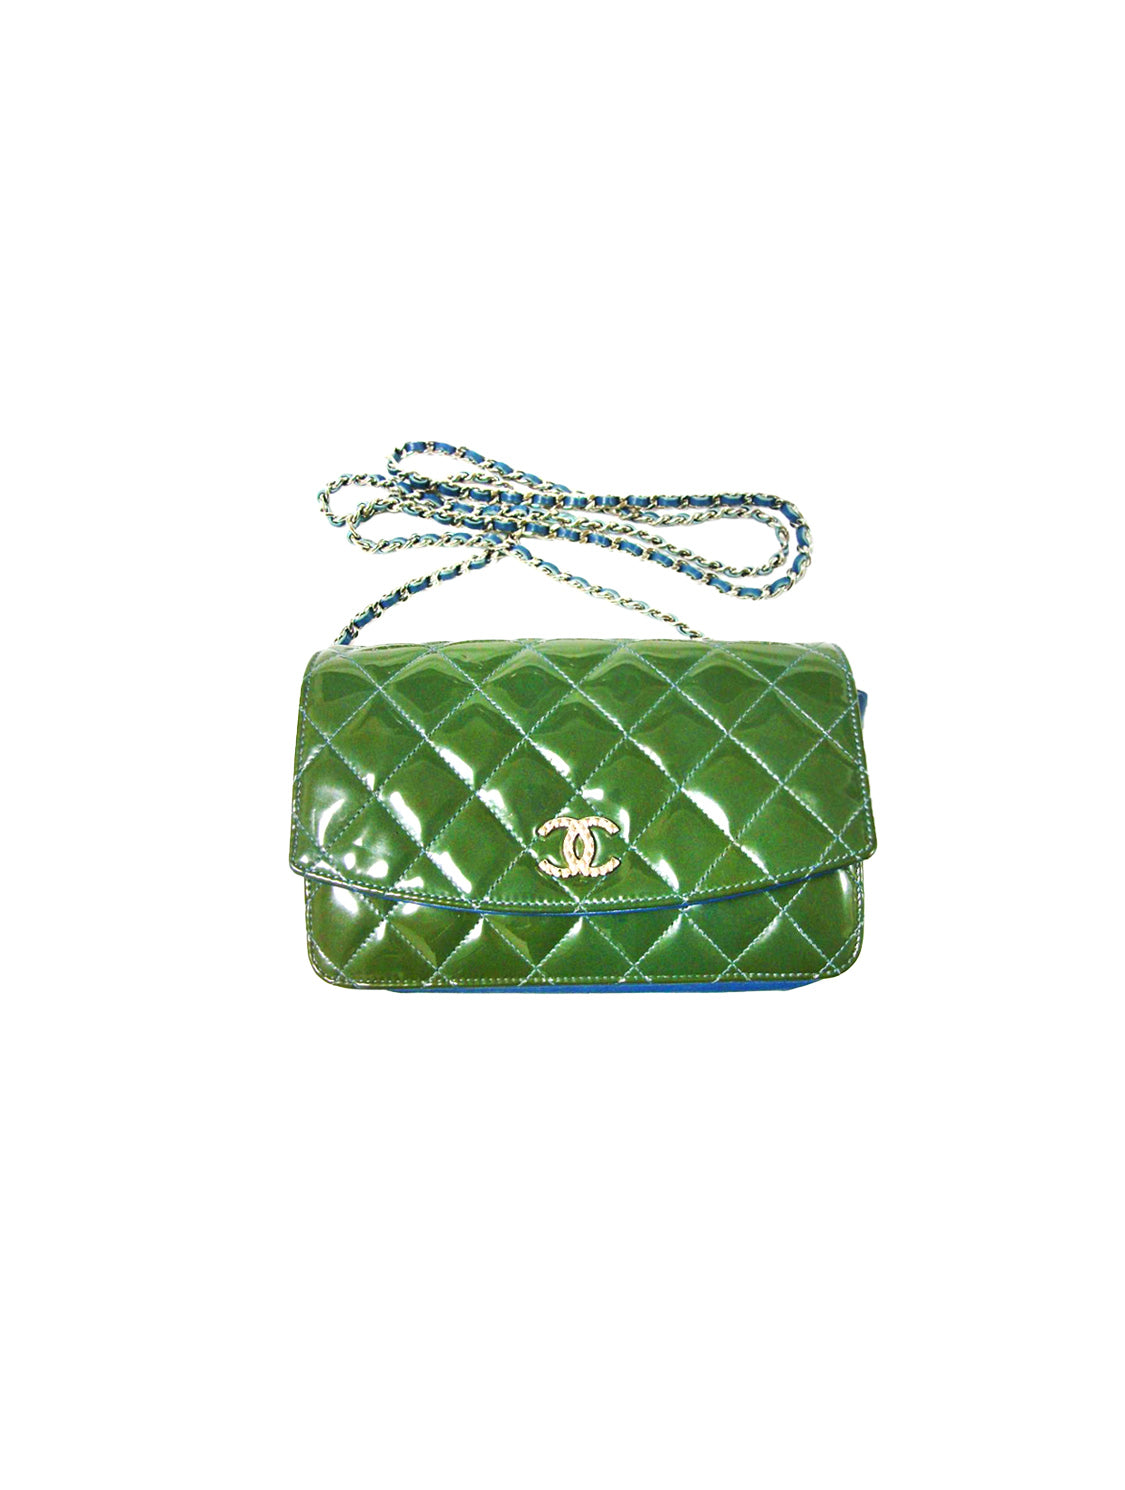 Chanel Wallet on Chain 20B Green Caviar Leather, Silver Hardware, New in Box